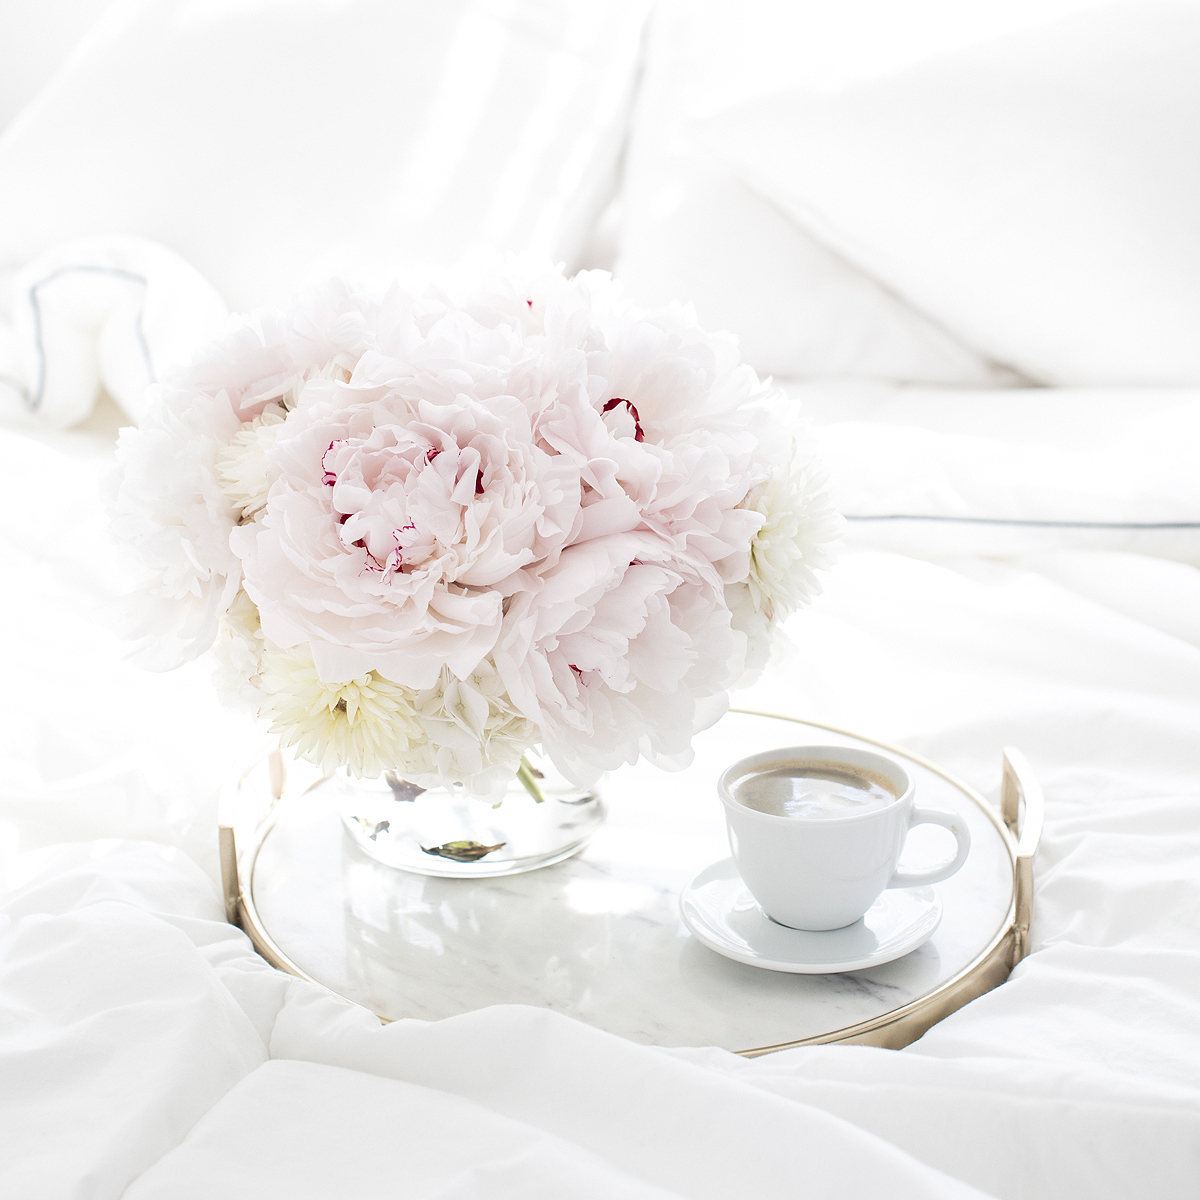 Soft pink and white flower bouquet and coffee cup on a breakfast tray